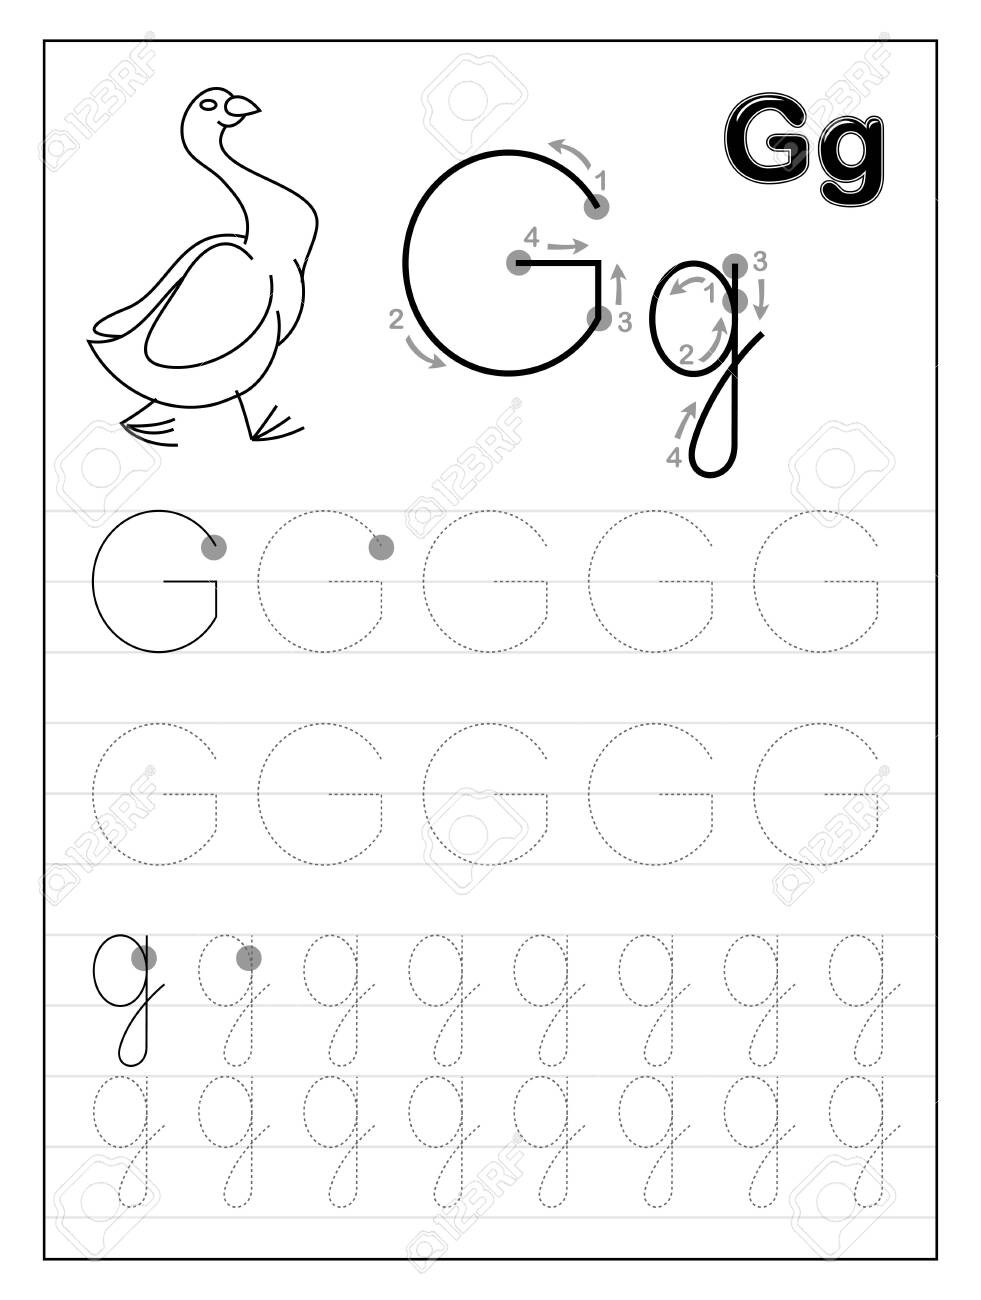 Letter G Tracing Worksheets Preschool Tracing Alphabet Letter G Black and White Educational Pages